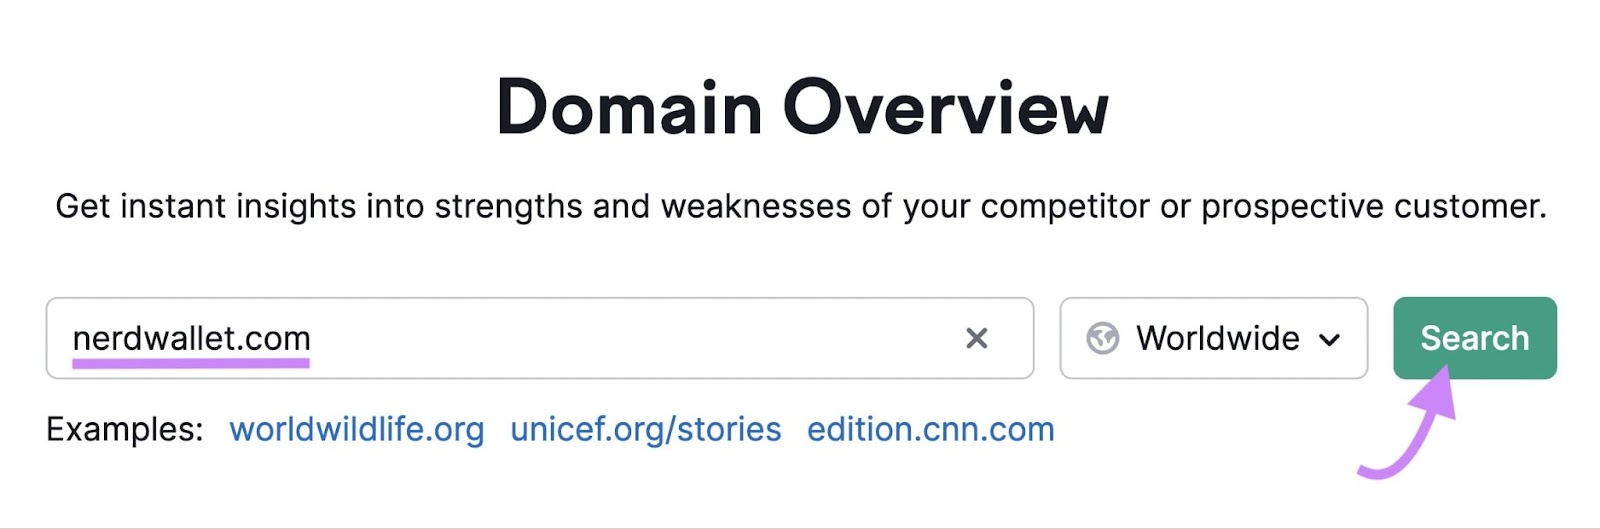 "nerdwallet.com" entered into the Domain Overview tool